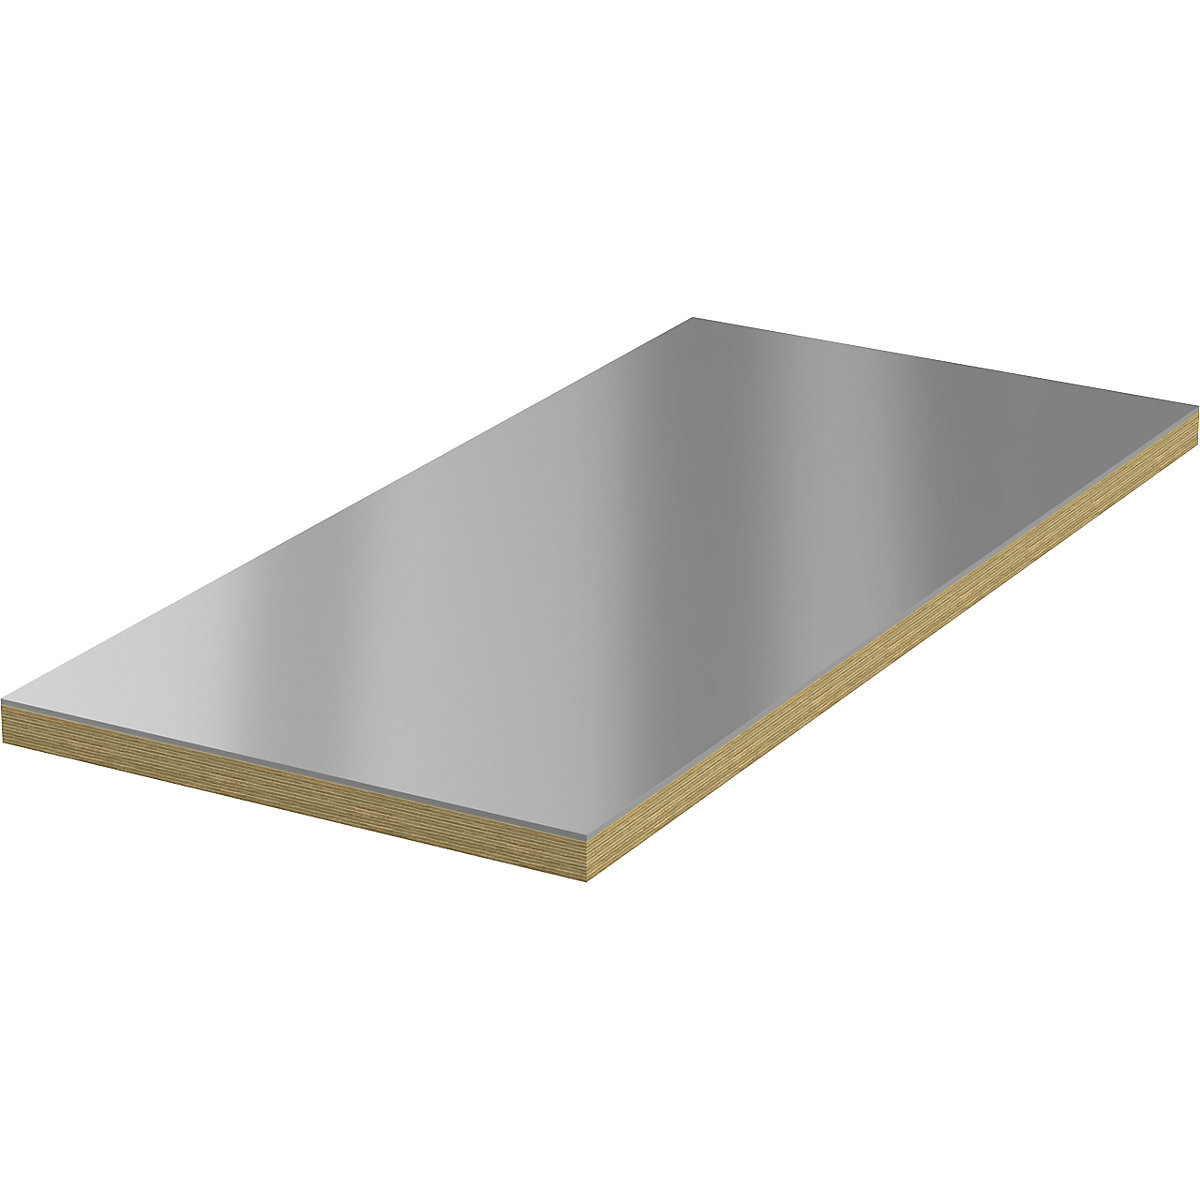 Sheet steel support for workbench tops